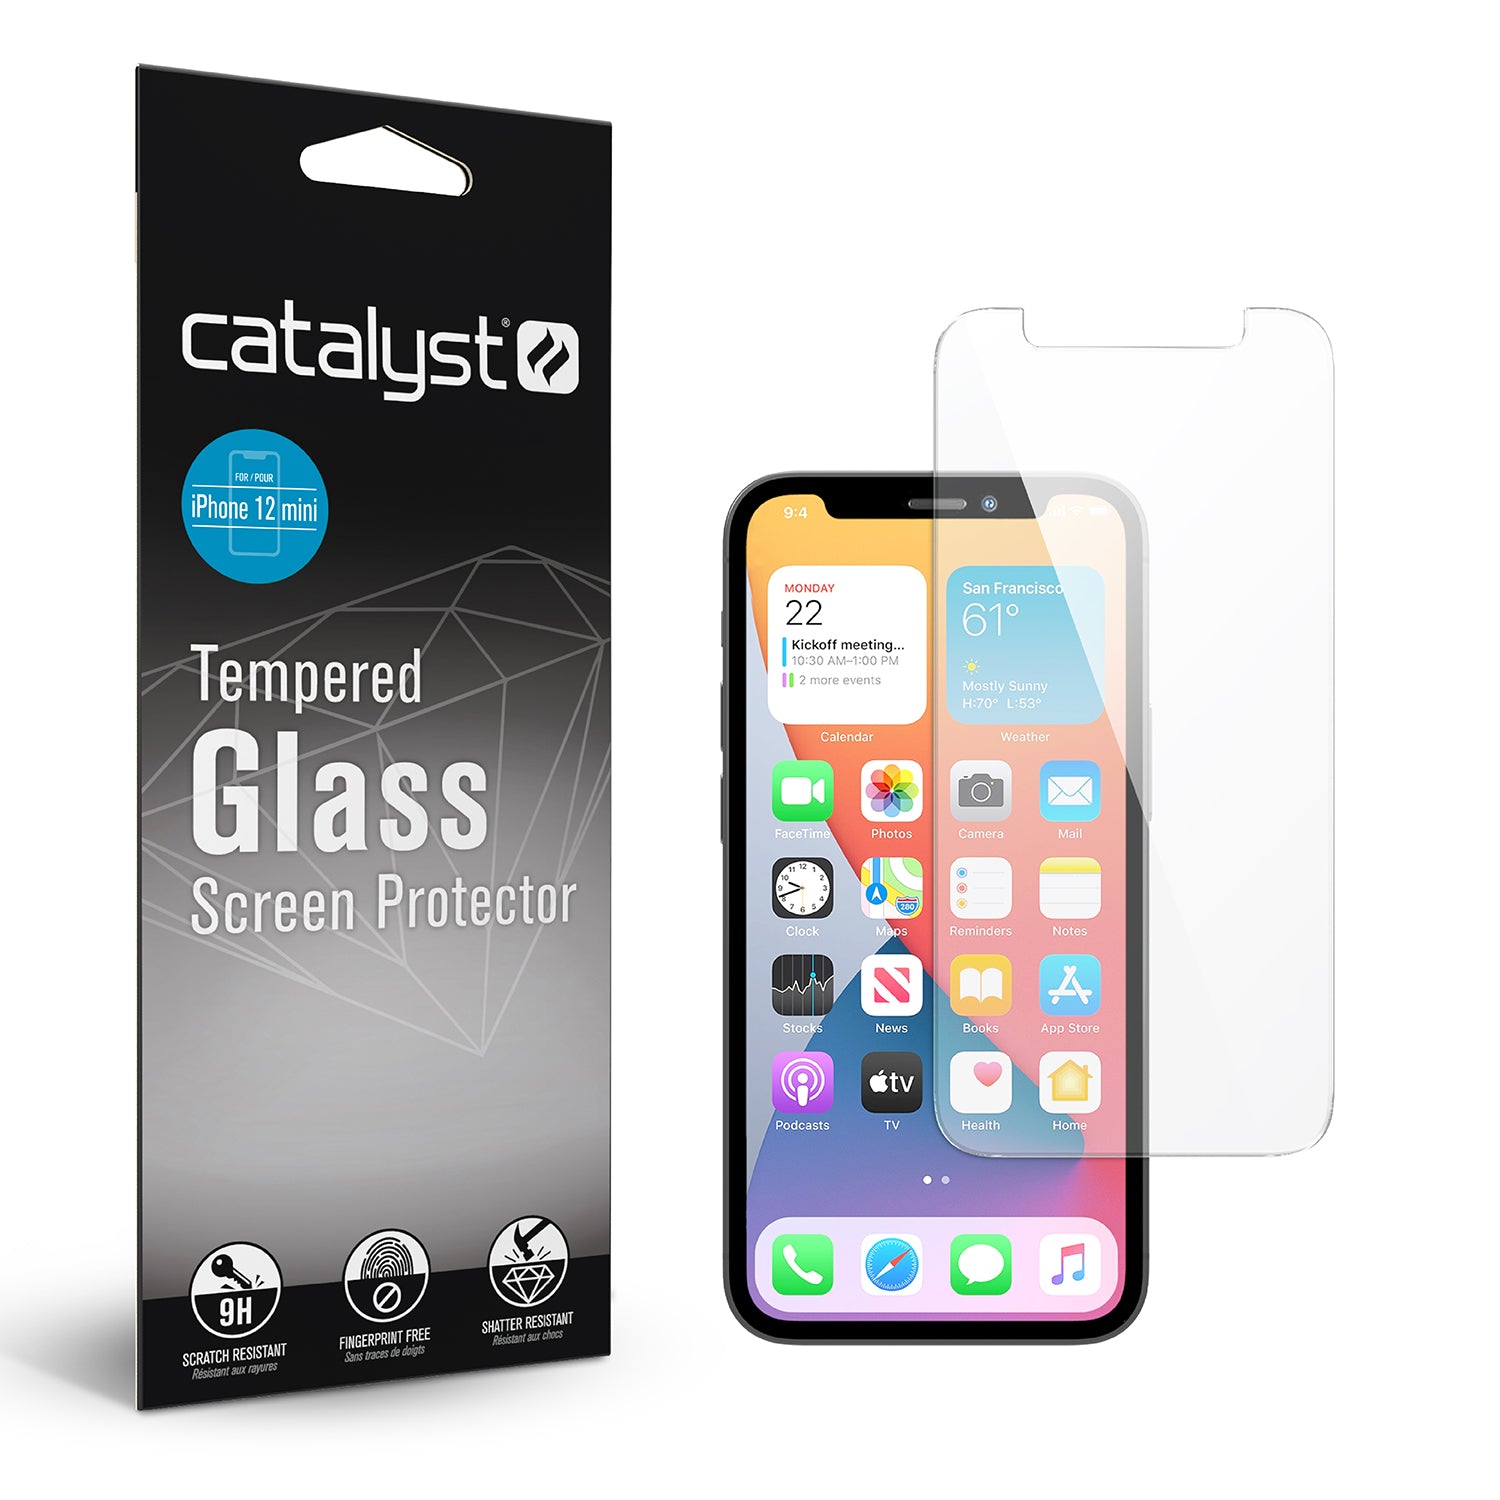 Catalyst Add a Tempered Glass Screen Protector for iPhone 12 mini with packaging and tempered glass screen protector and iPhone.